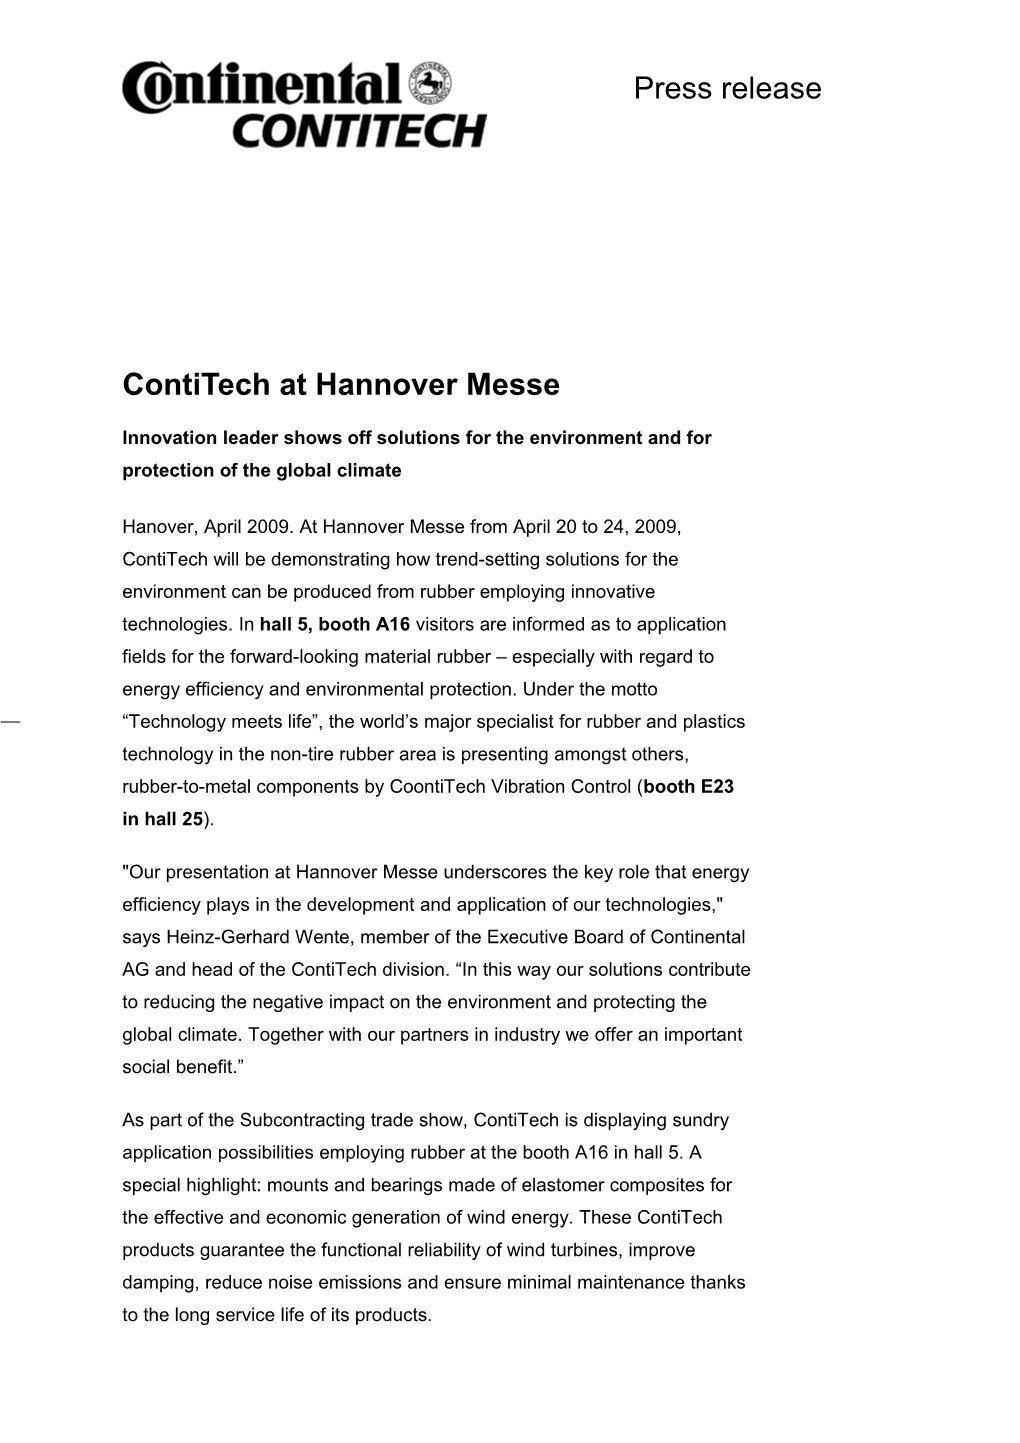 Contitech at Hannover Messe